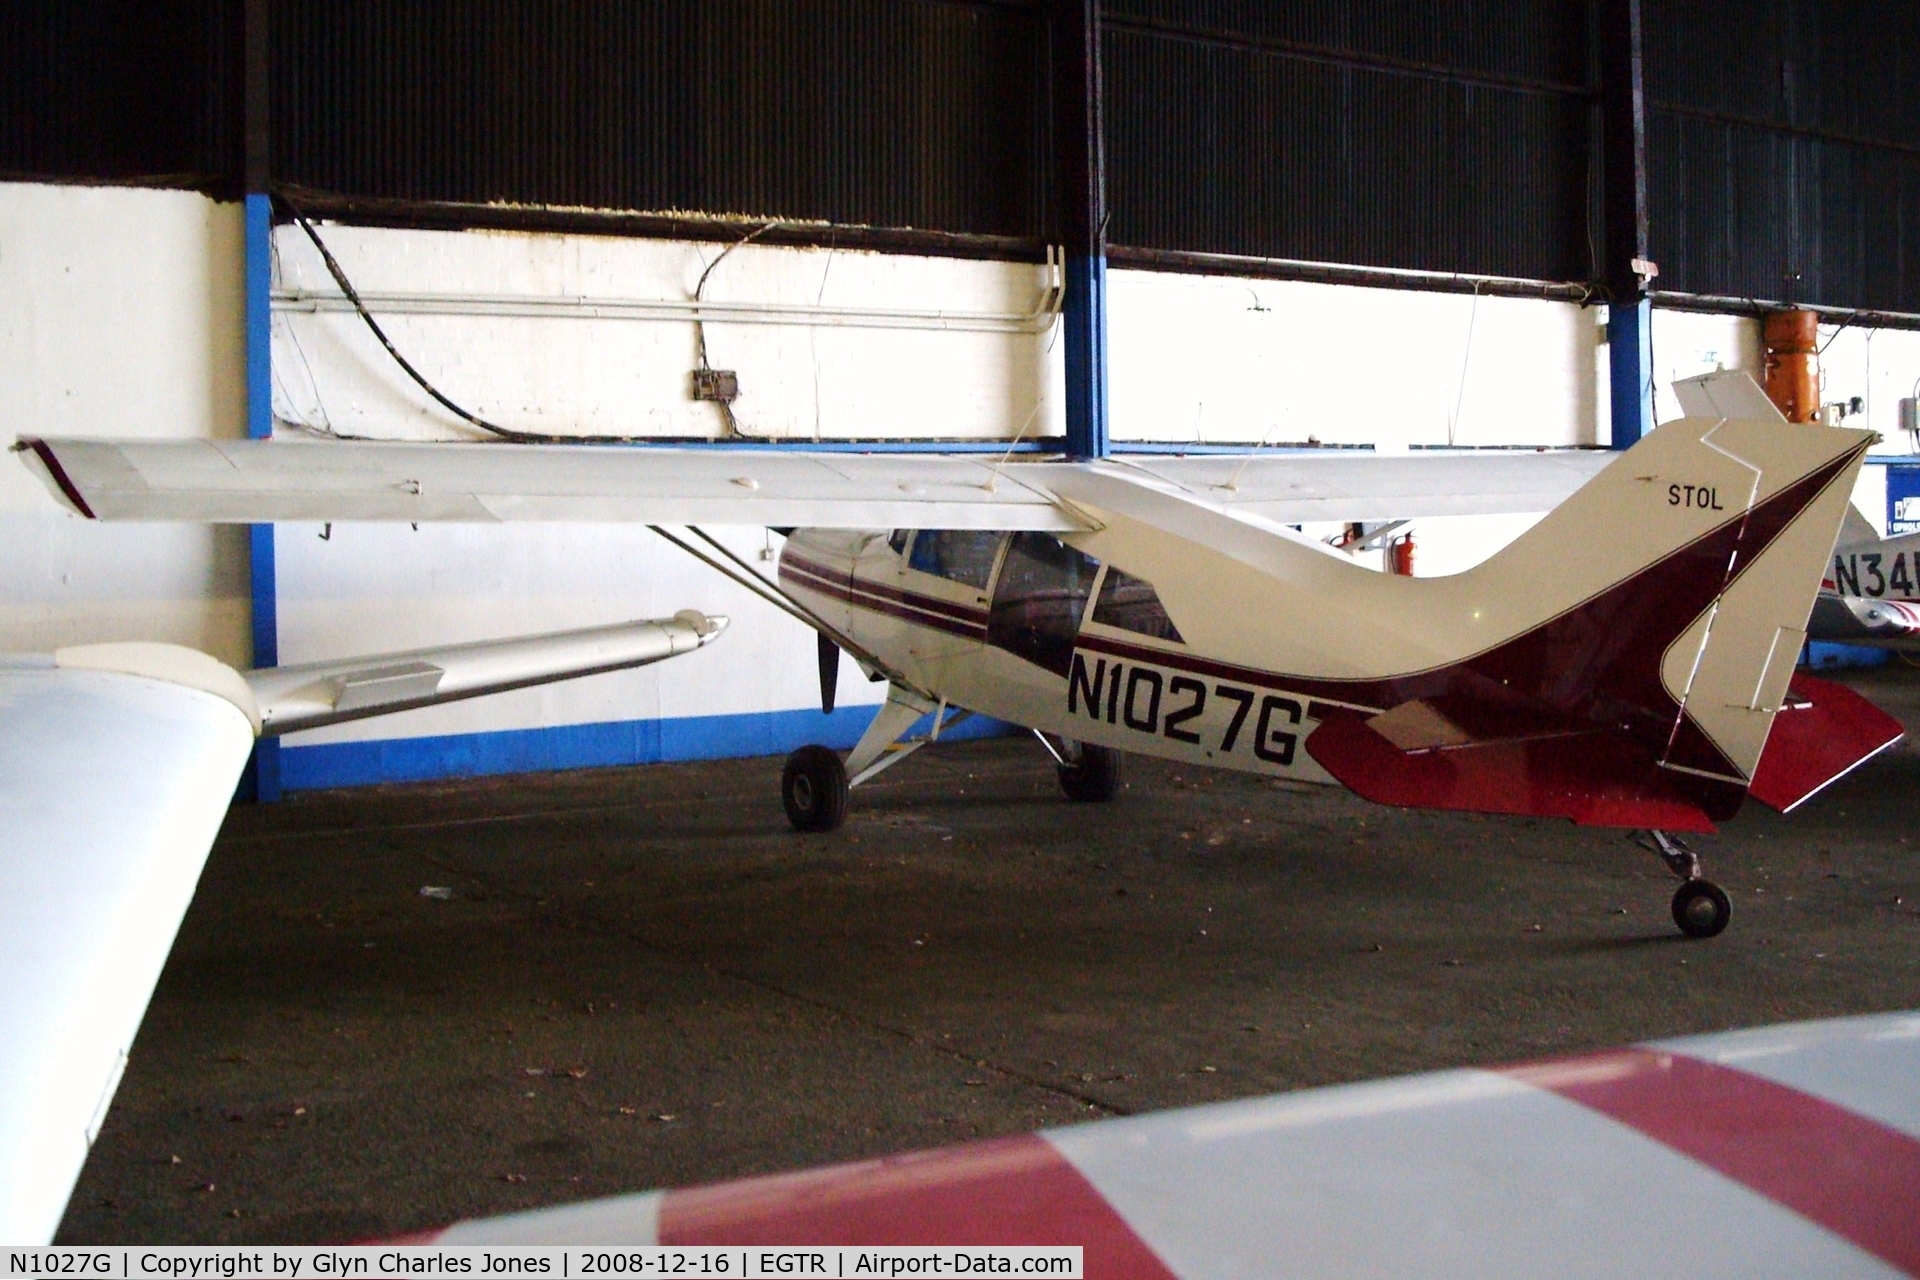 N1027G, 1996 Maule M-7-235B Super Rocket C/N 23032C, With thanks to the engineer of Metair who granted me authority to take photos in the hangar. Owned by Southern Aircraft Consultancy Inc Trustee.